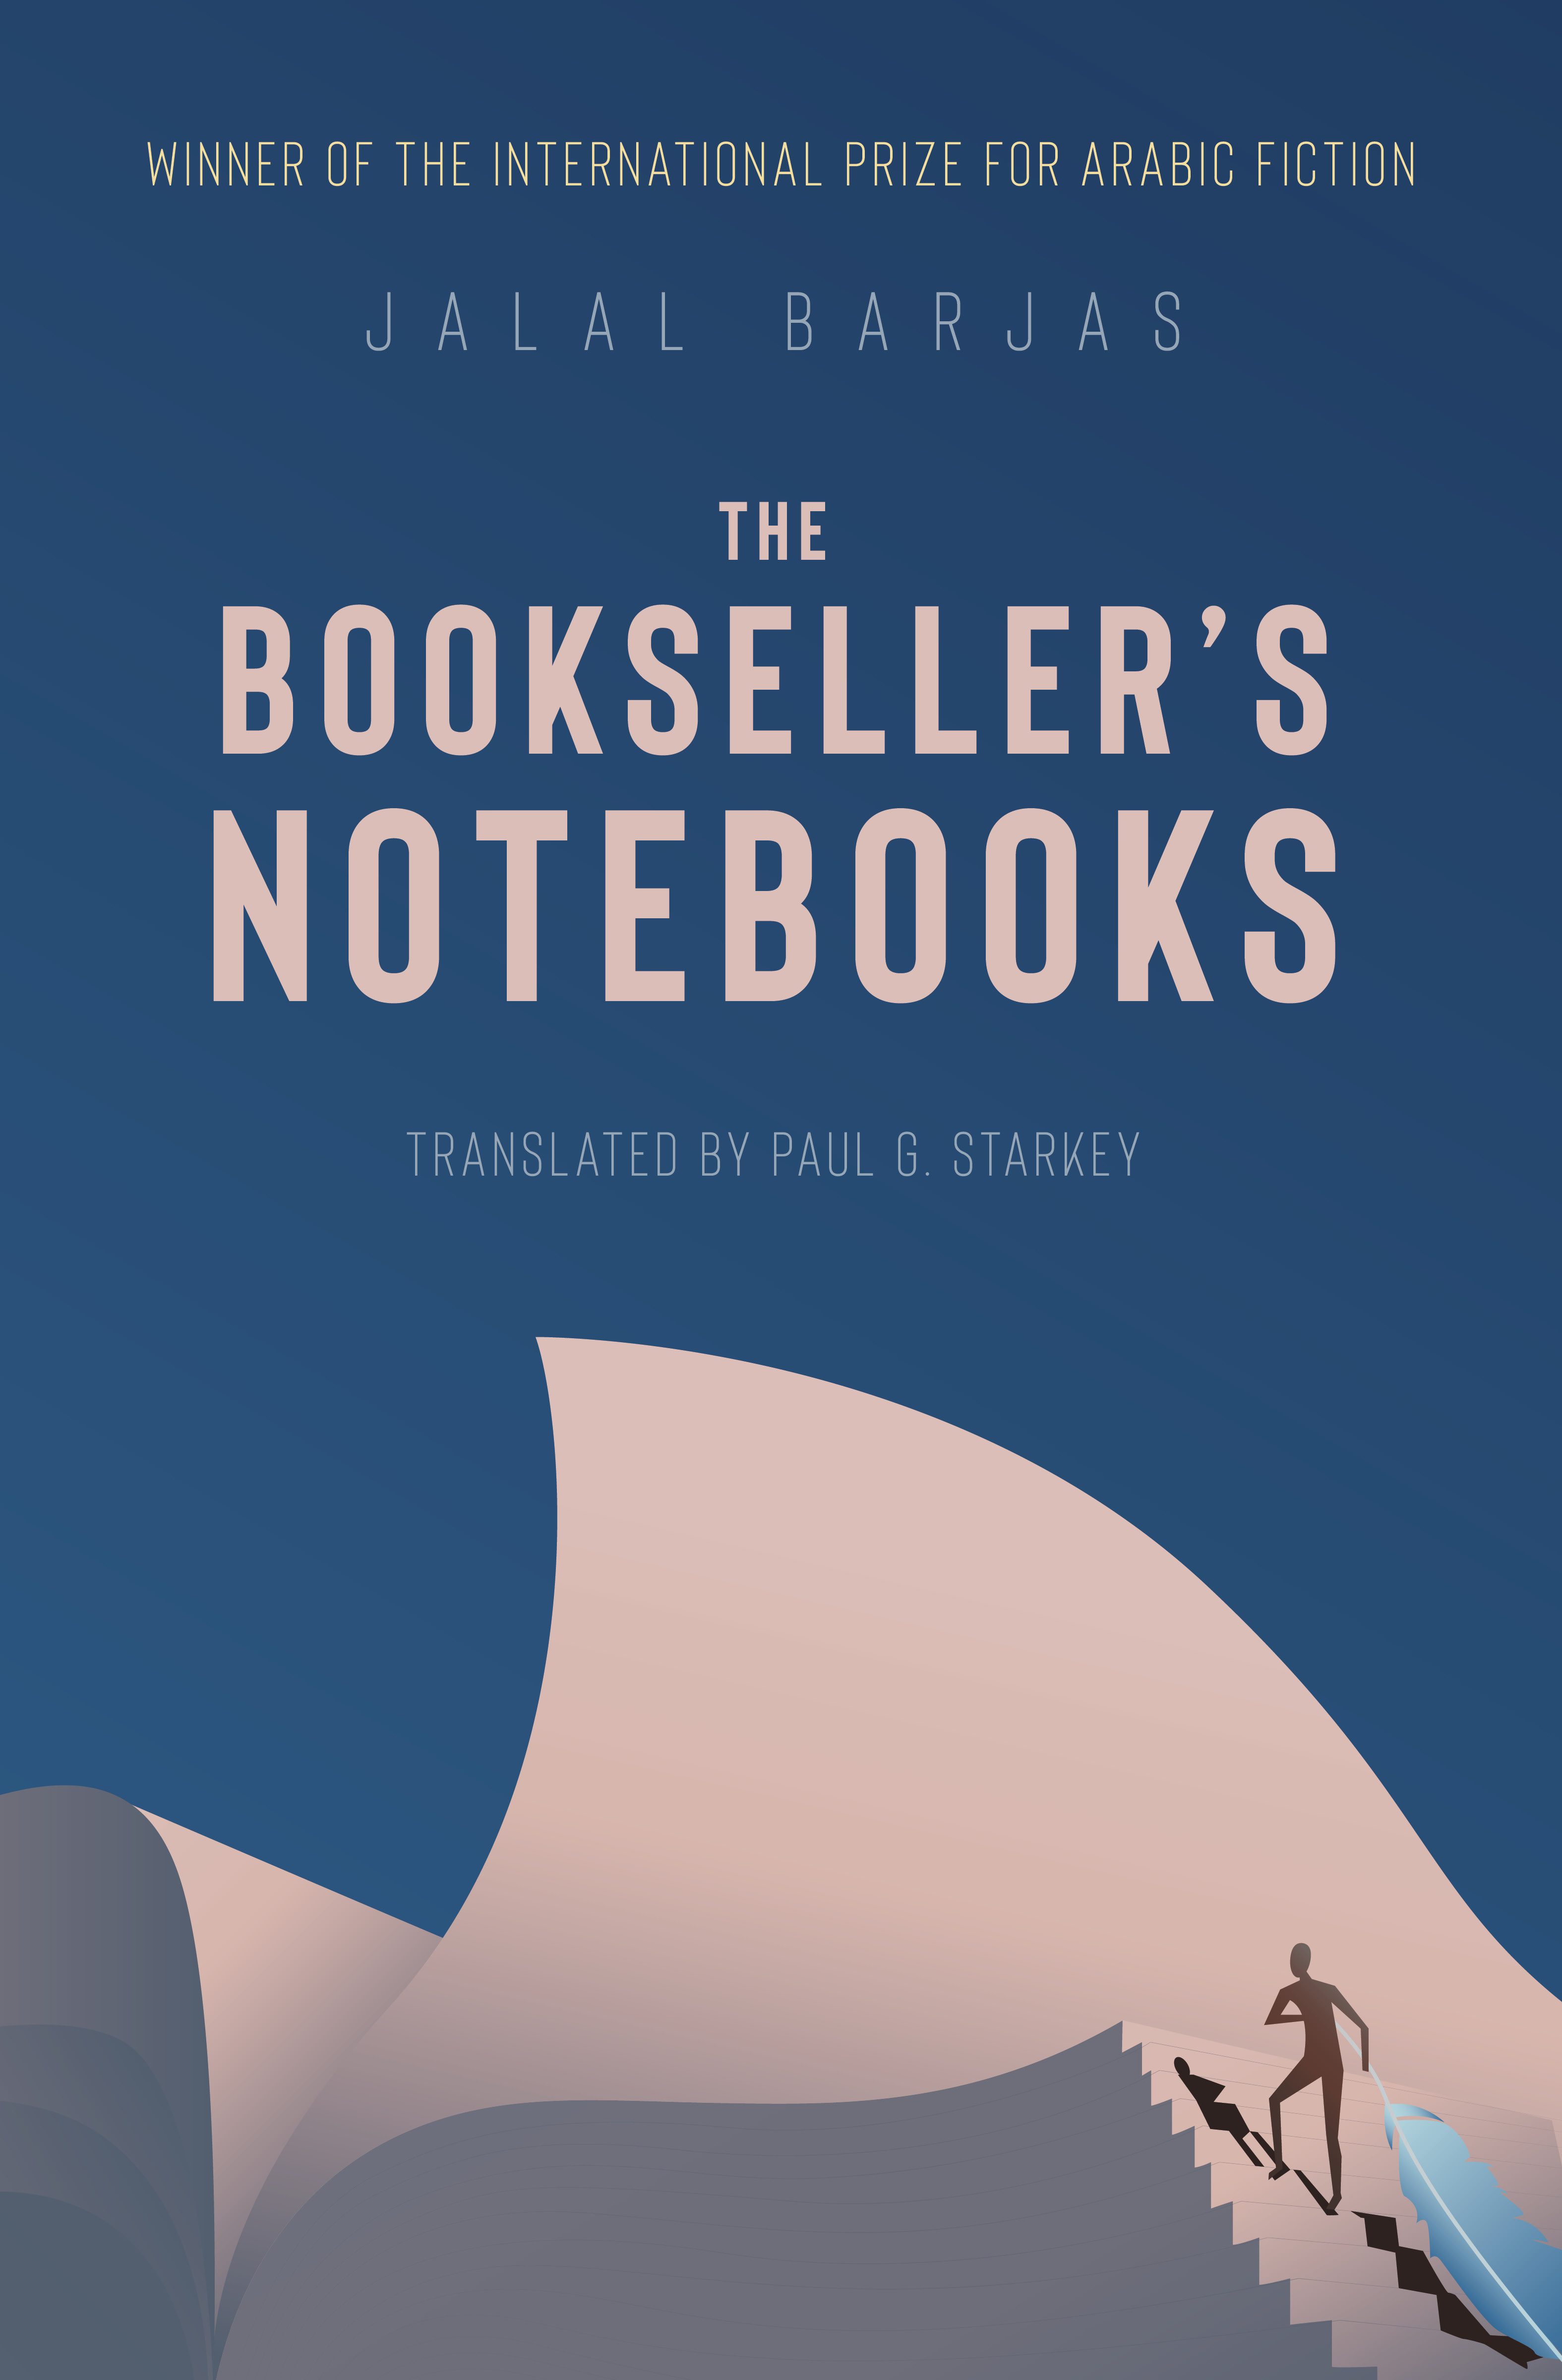 The Bookseller’s Notebooks